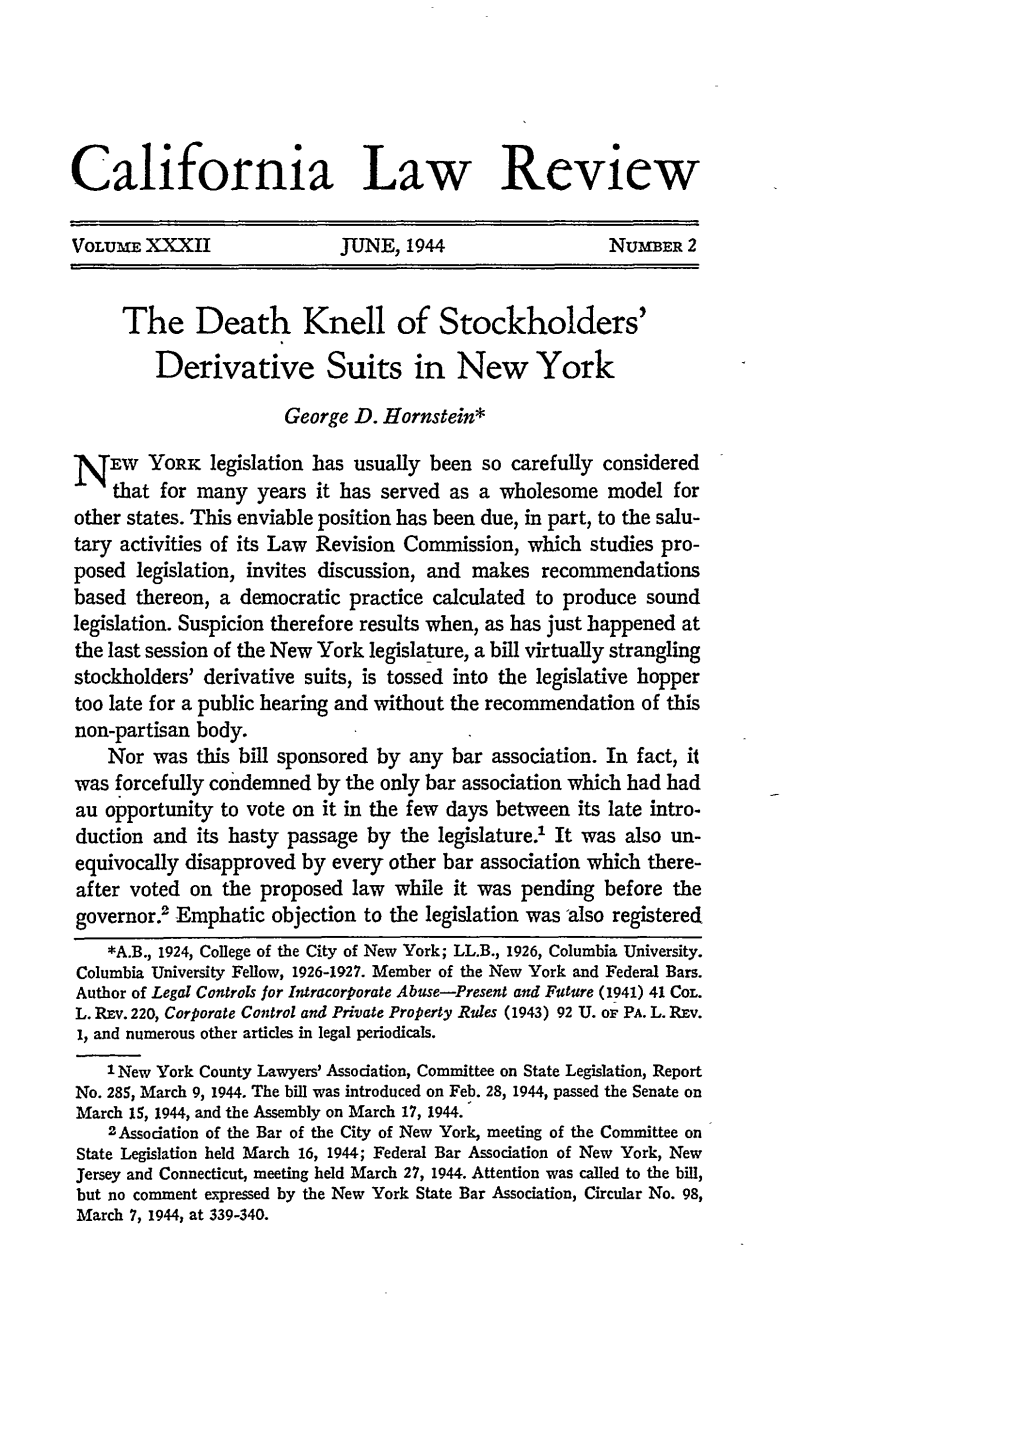 The Death Knell of Stockholders' Derivative Suits in New York George D